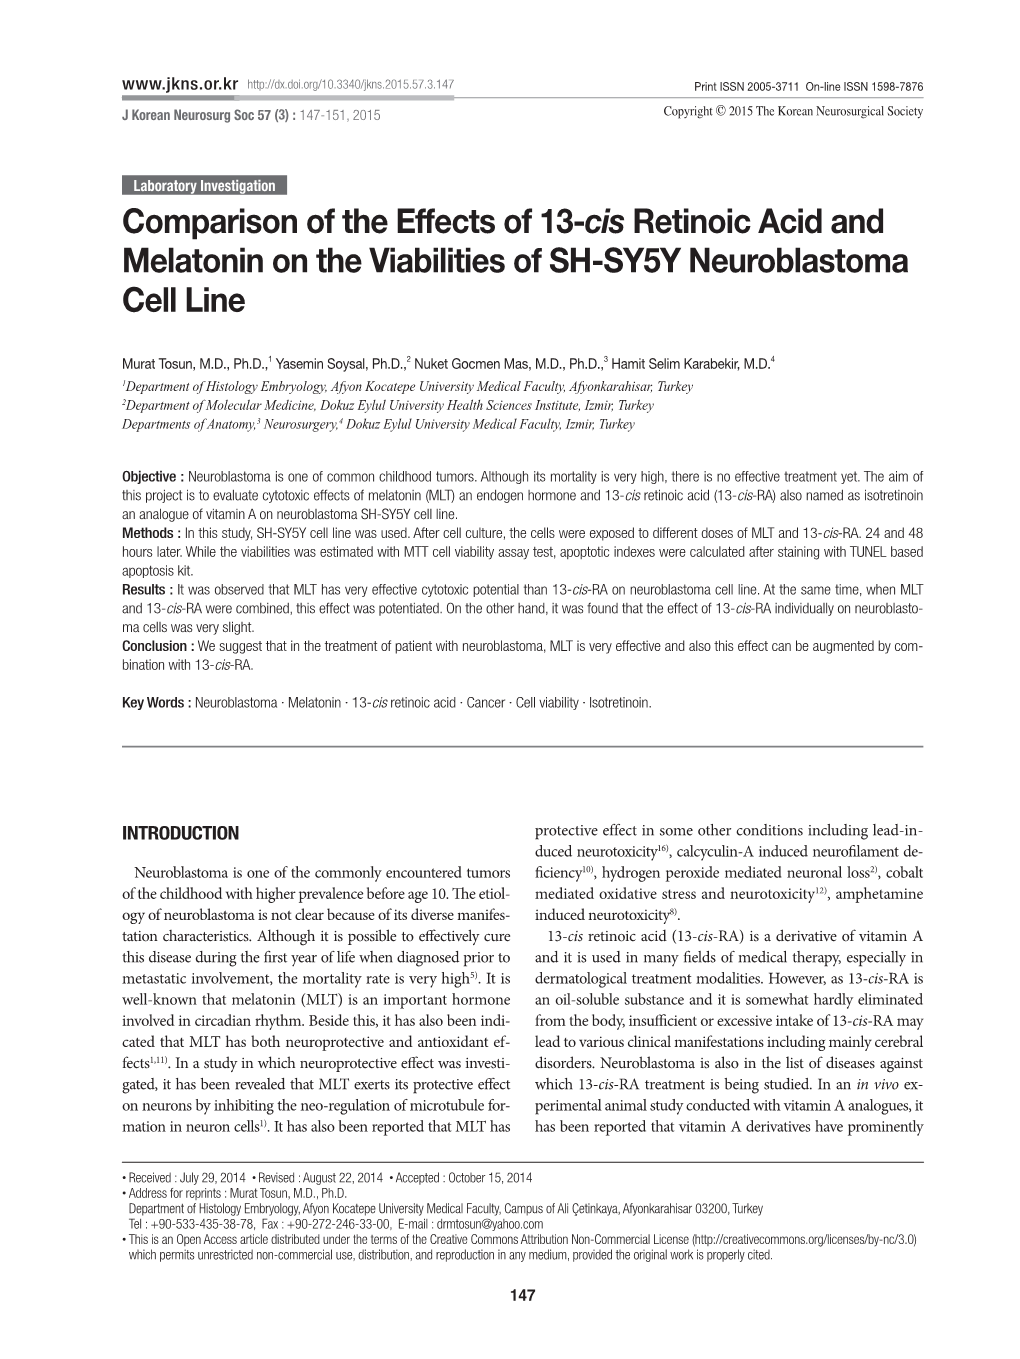 Comparison of the Effects of 13-Cis Retinoic Acid and Melatonin on the Viabilities of SH-SY5Y Neuroblastoma Cell Line